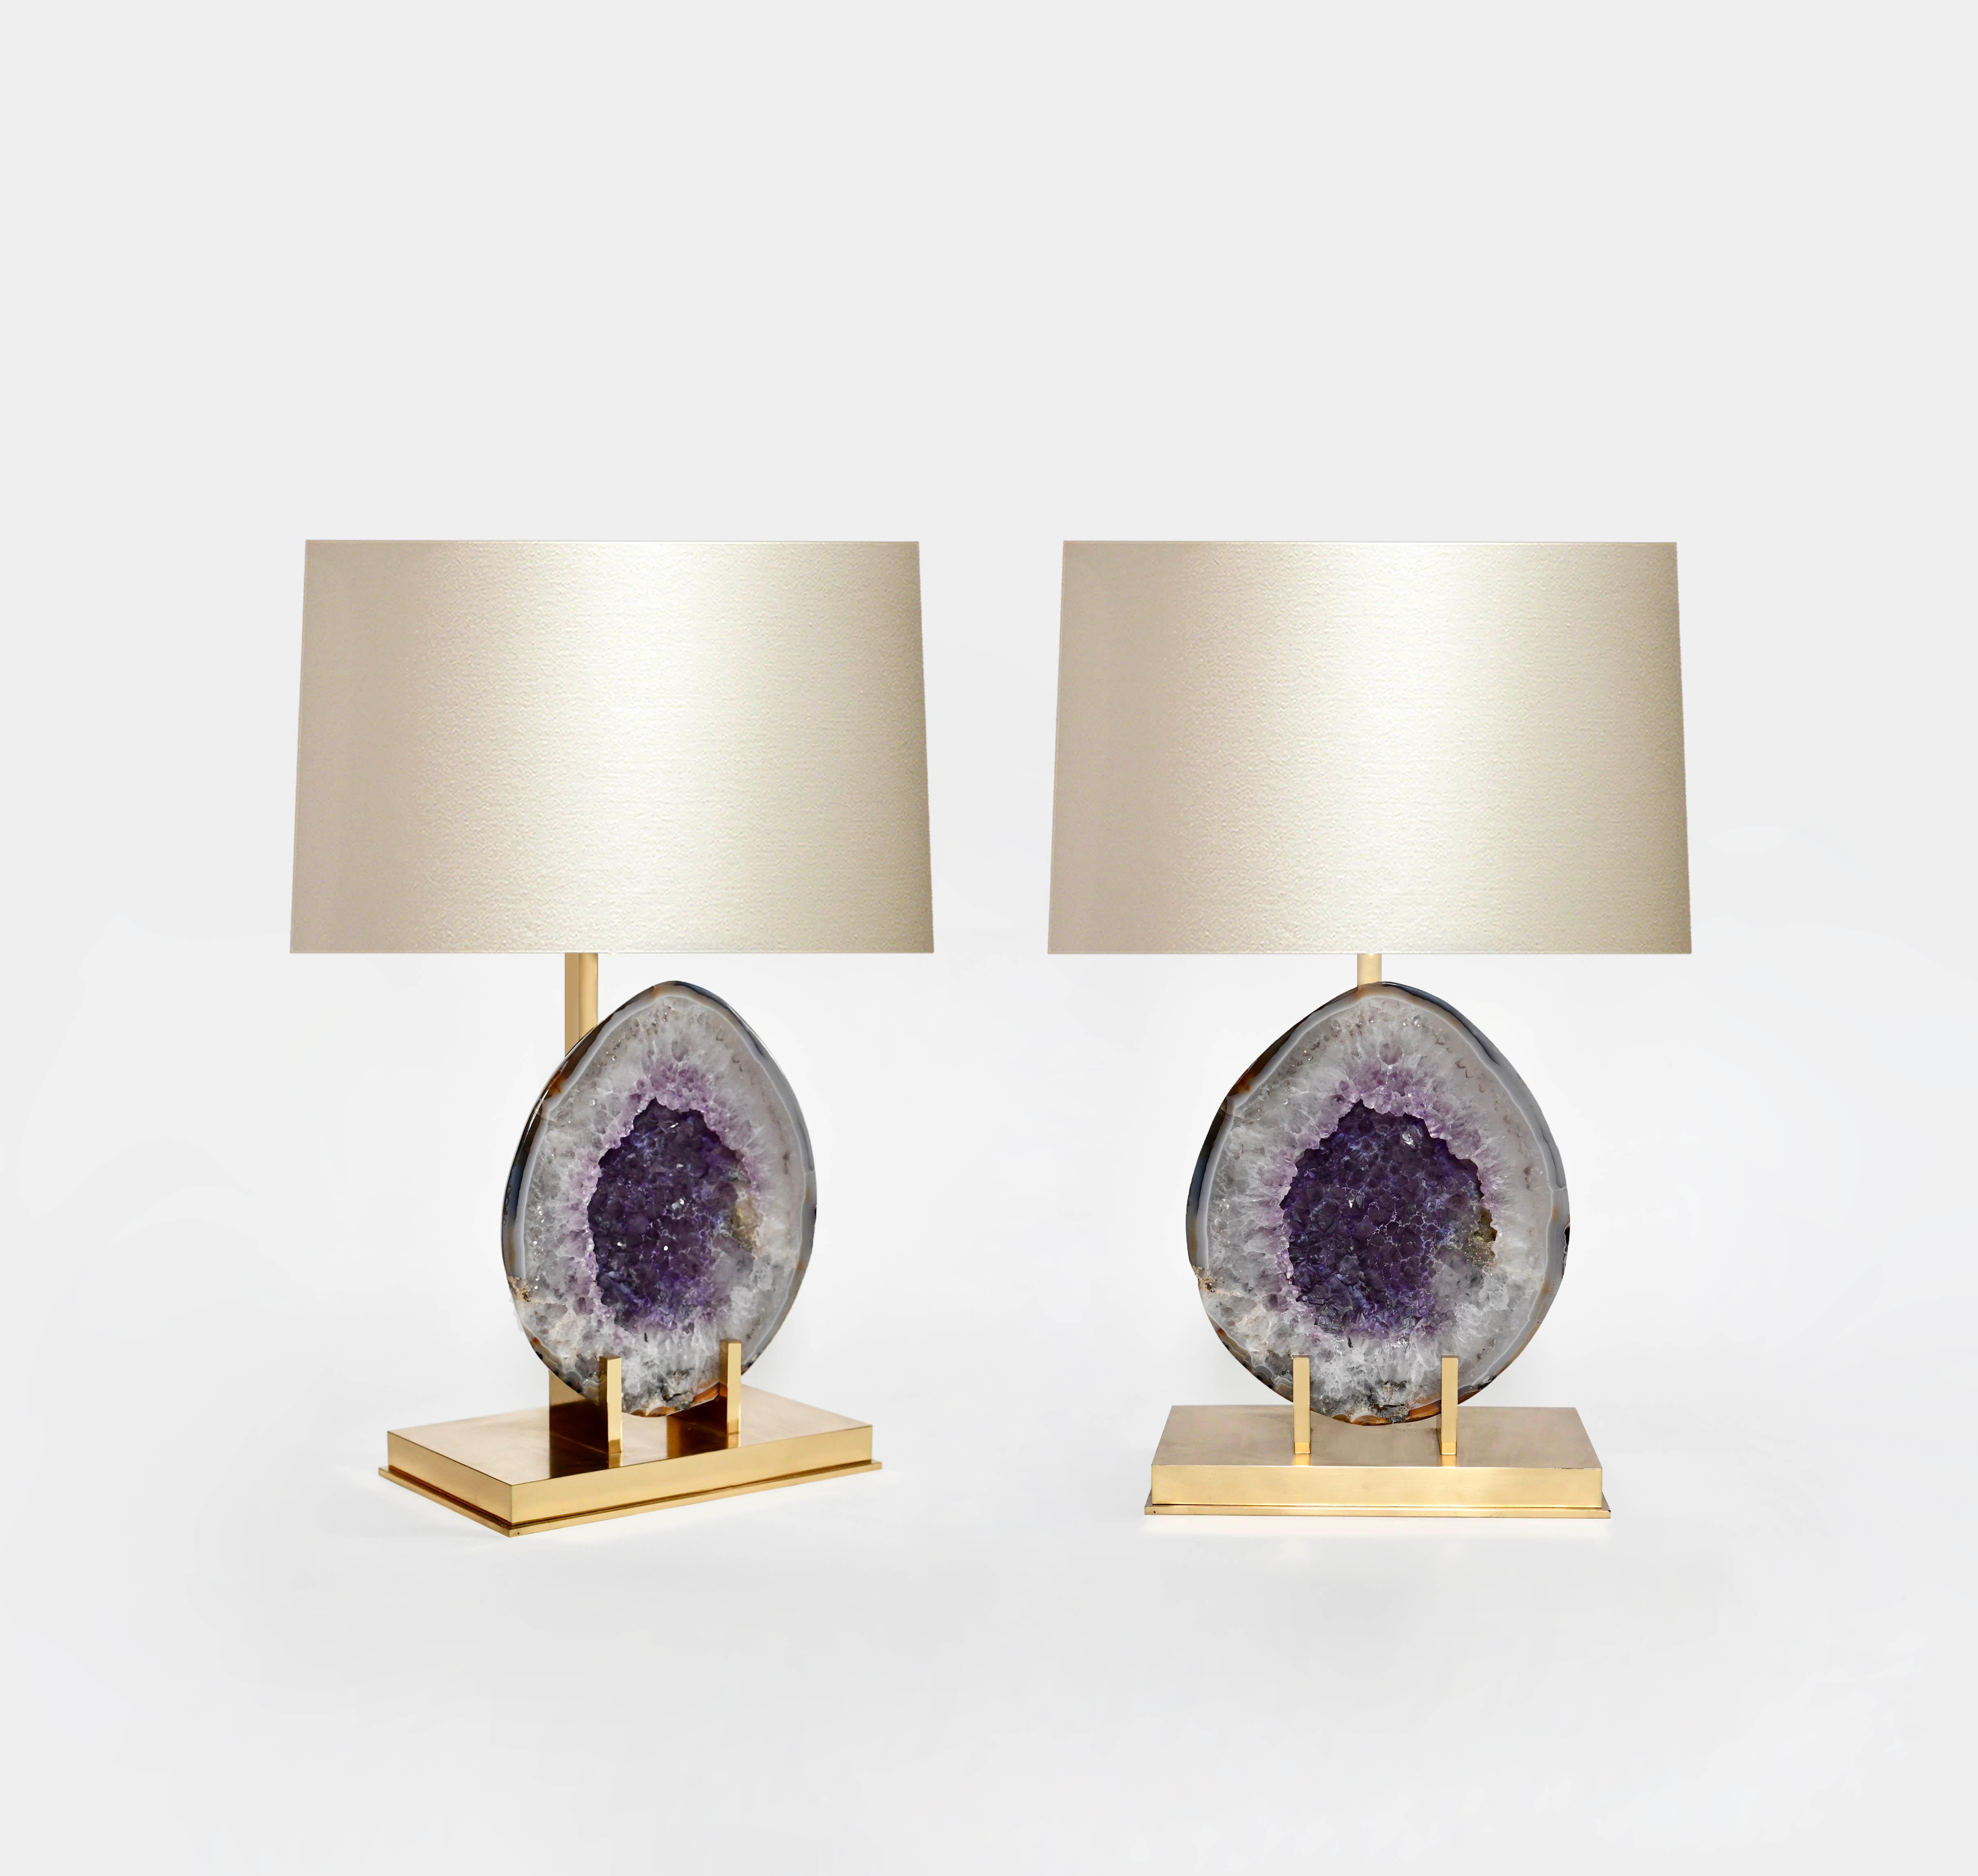 Pair of natural amethyst lamps with polished brass bases.
(Lampshade not included.)